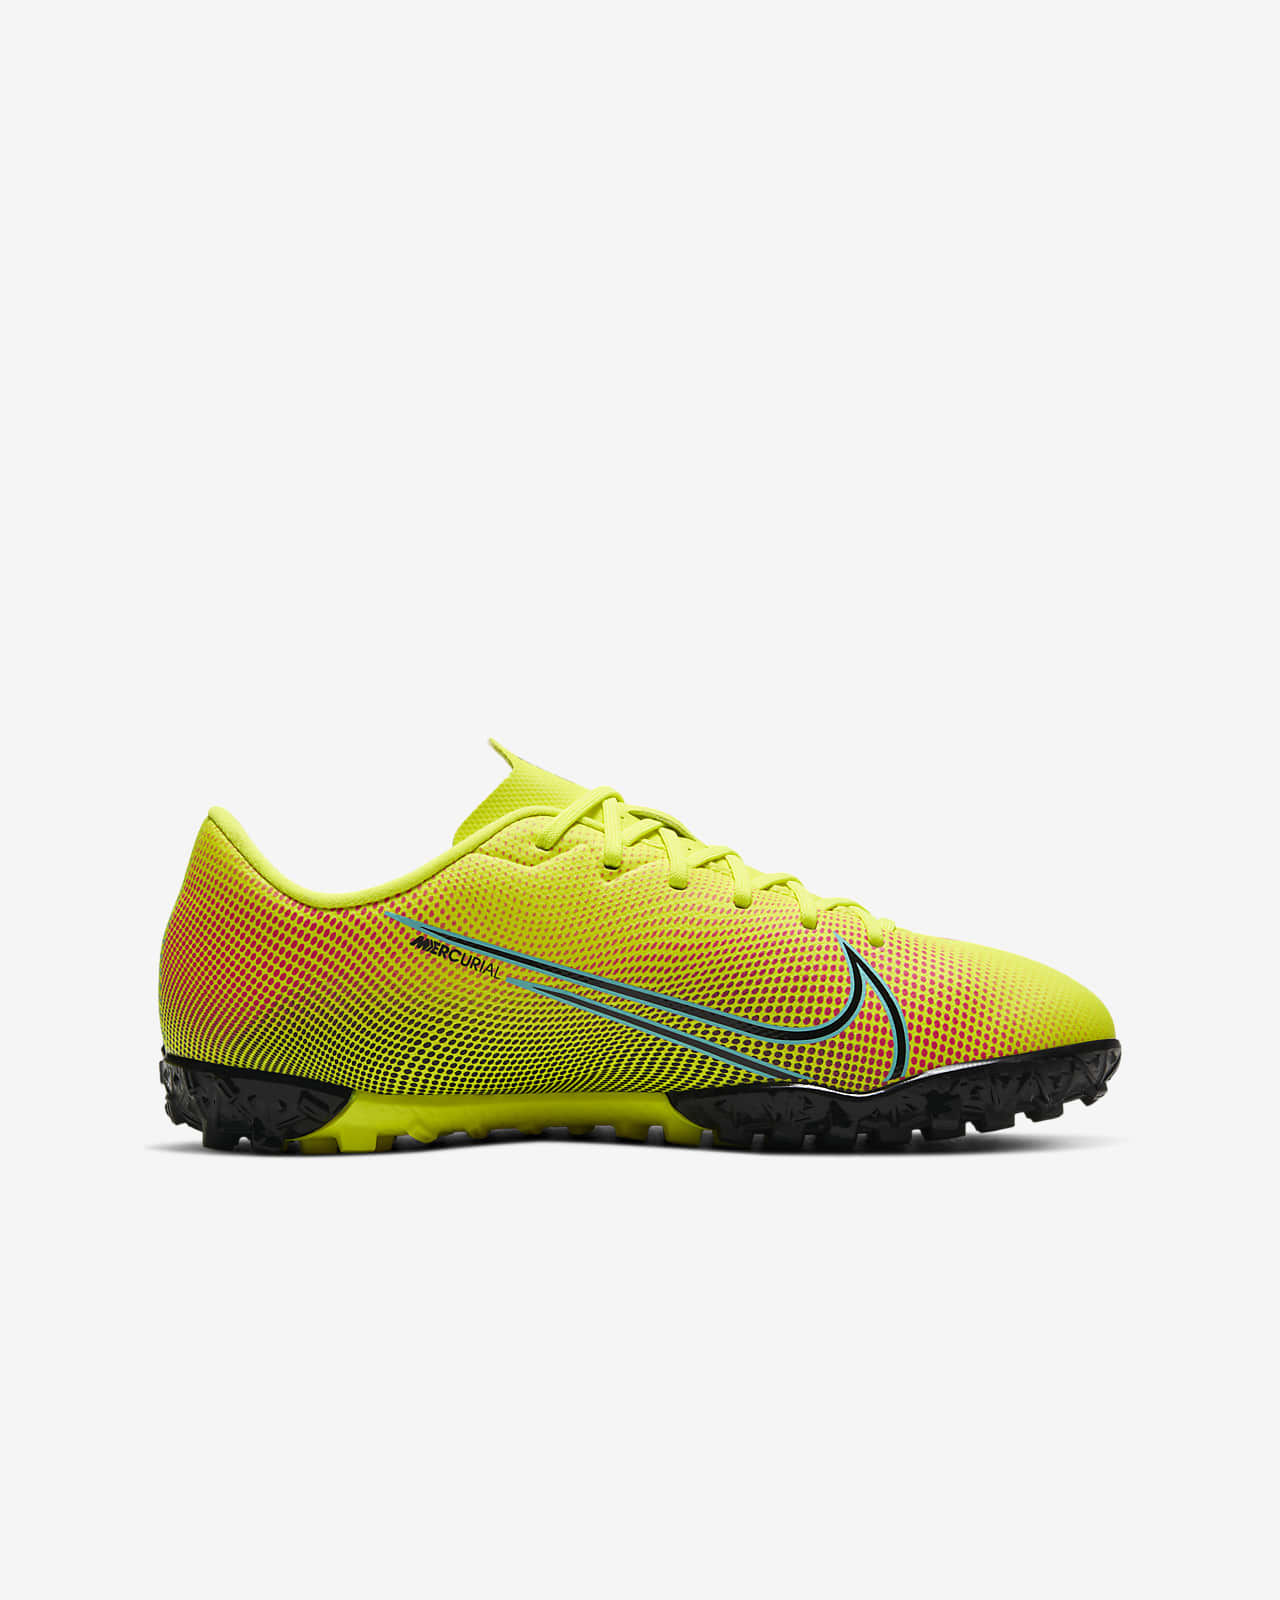 artificial turf soccer boots